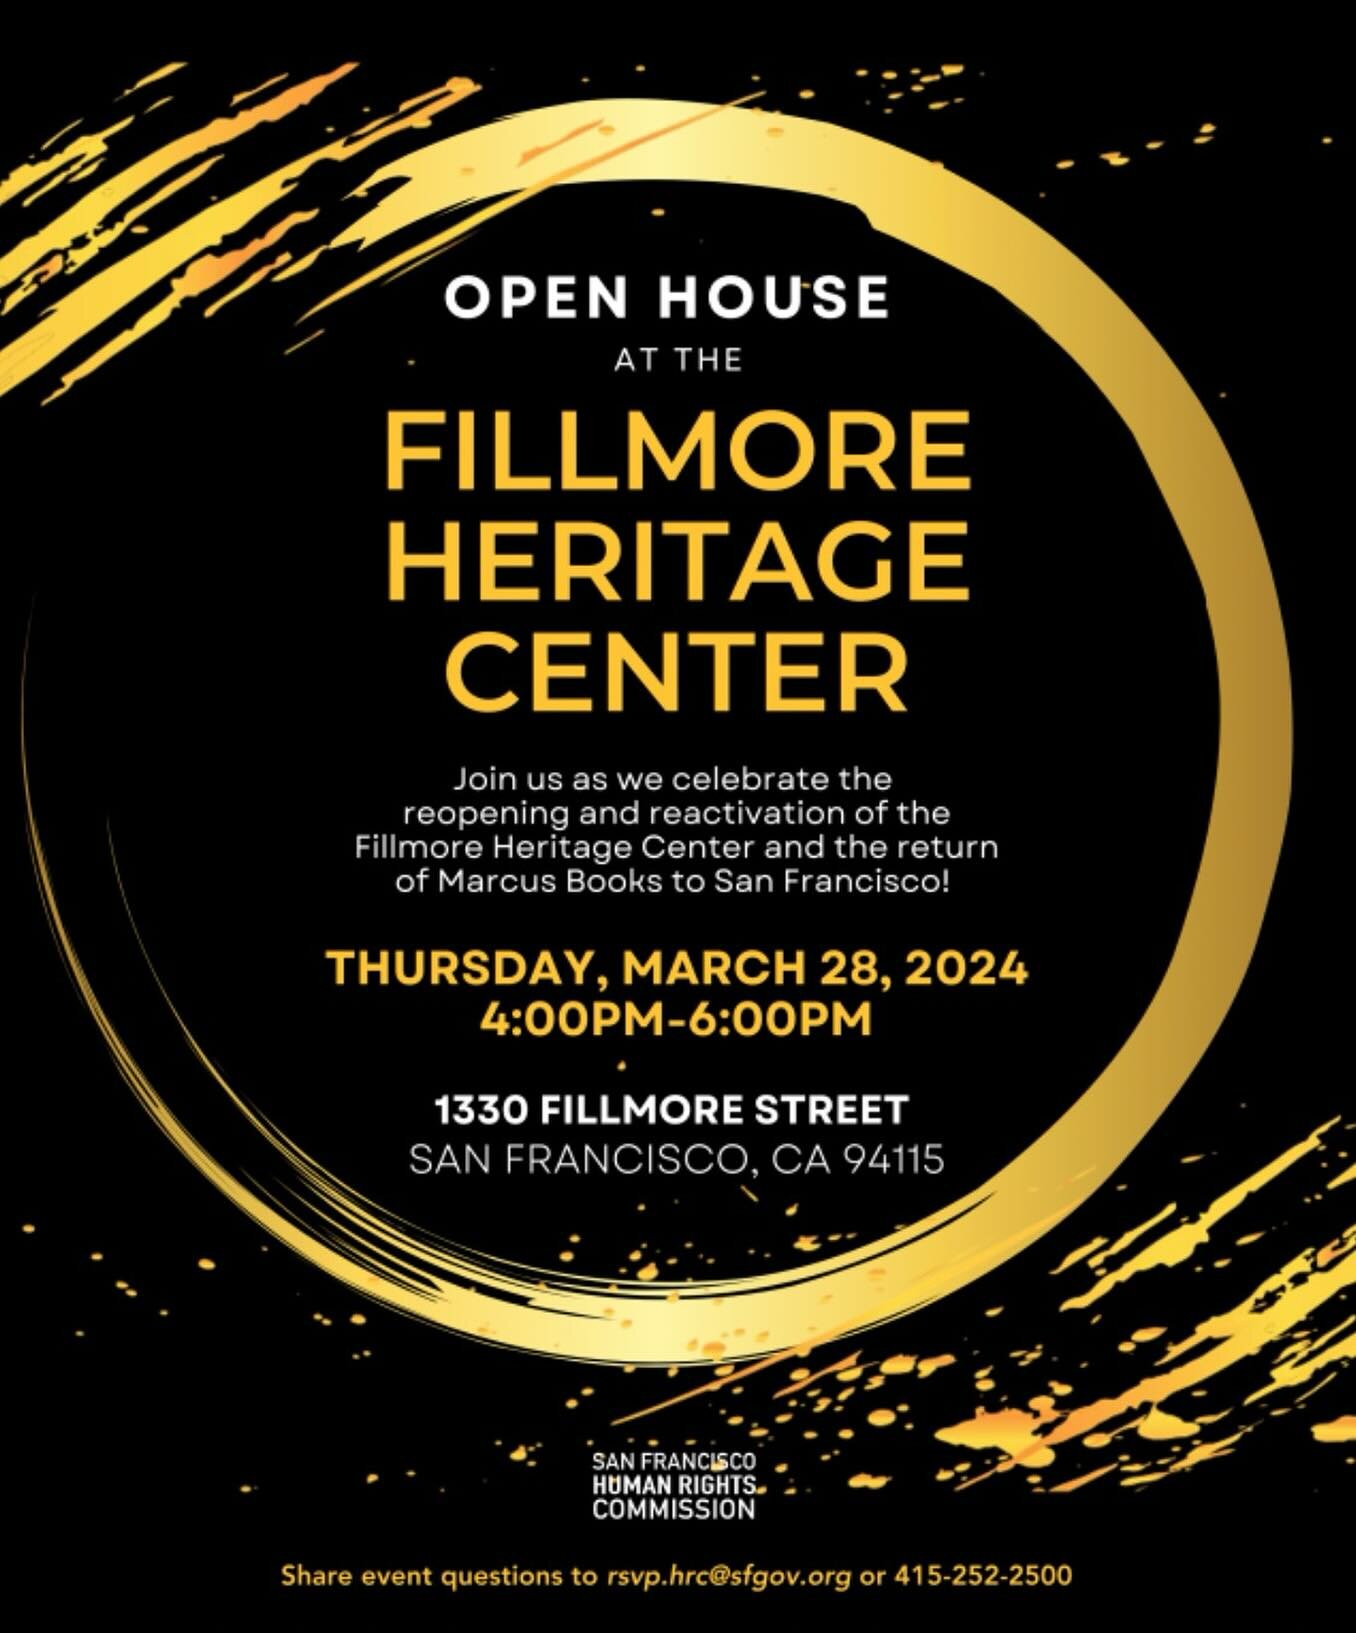 You&rsquo;re Invited! Join us for an Open House at Fillmore Heritage Center TOMORROW, March 28th, 2024 from 4:00pm-6:00pm at 1330 Fillmore Street, San Francisco, CA 94115! 🤩🎊

Come see the updates to the space - which includes the exciting return o